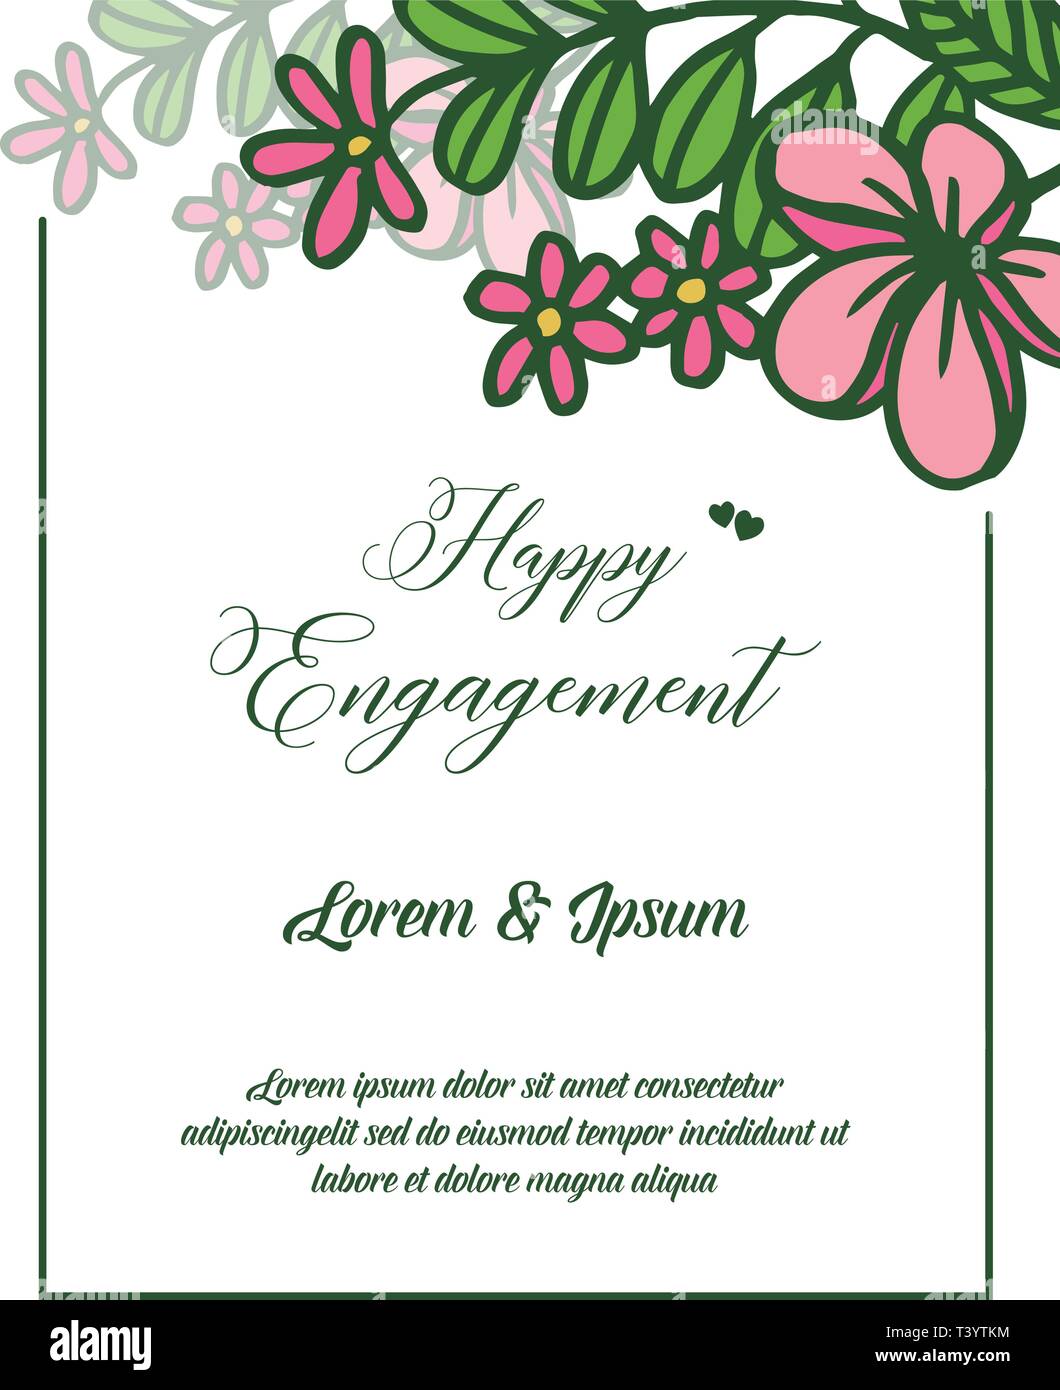 Vector illustration letter of happy engagement with wreath frame ...